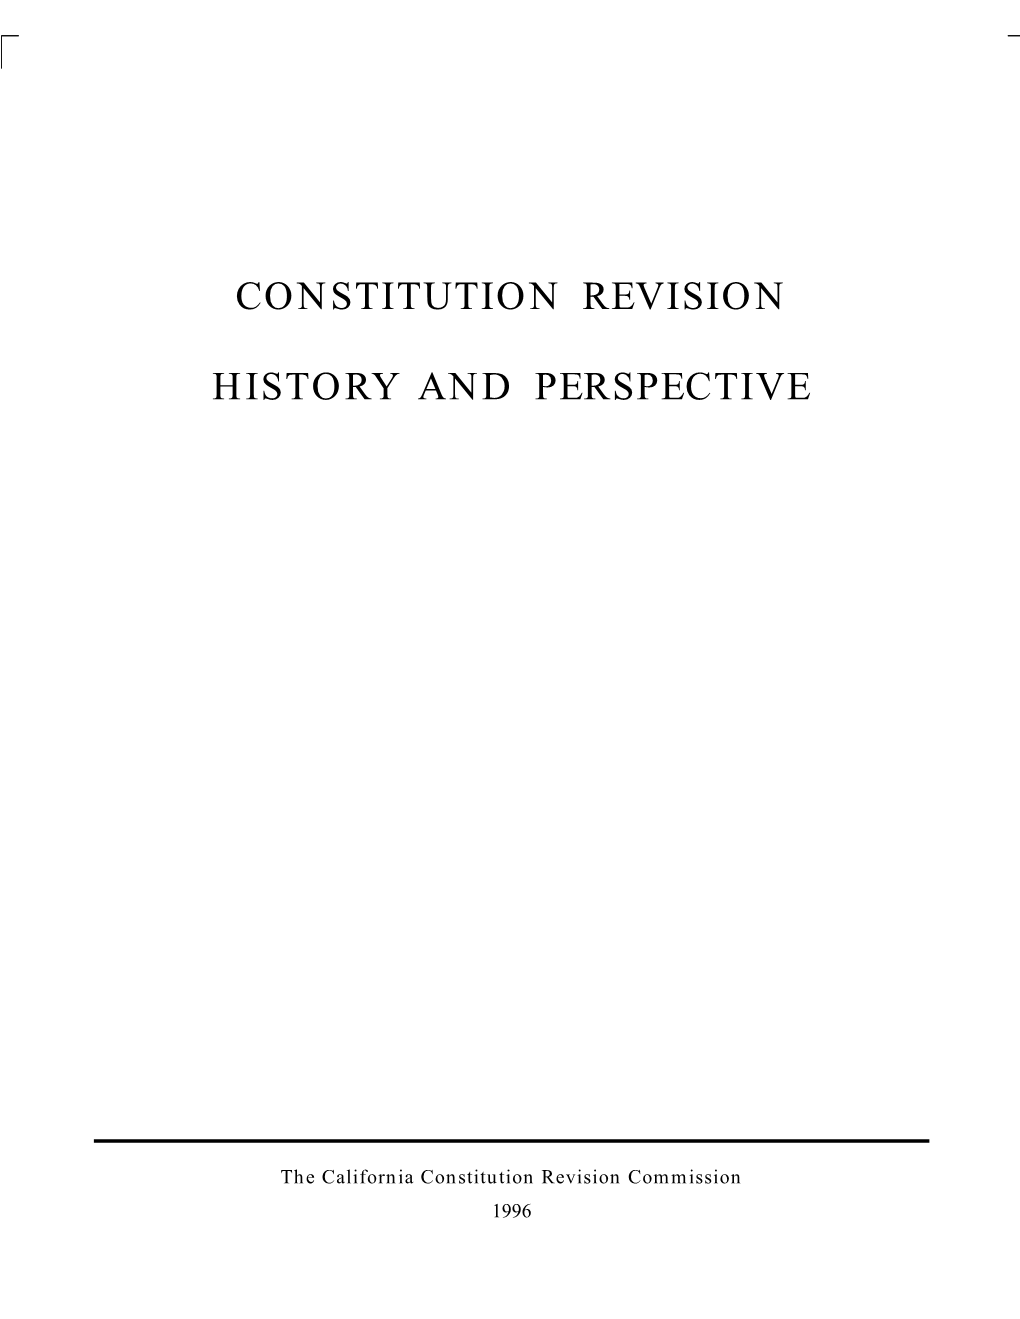 Constitution Revision History and Perspective